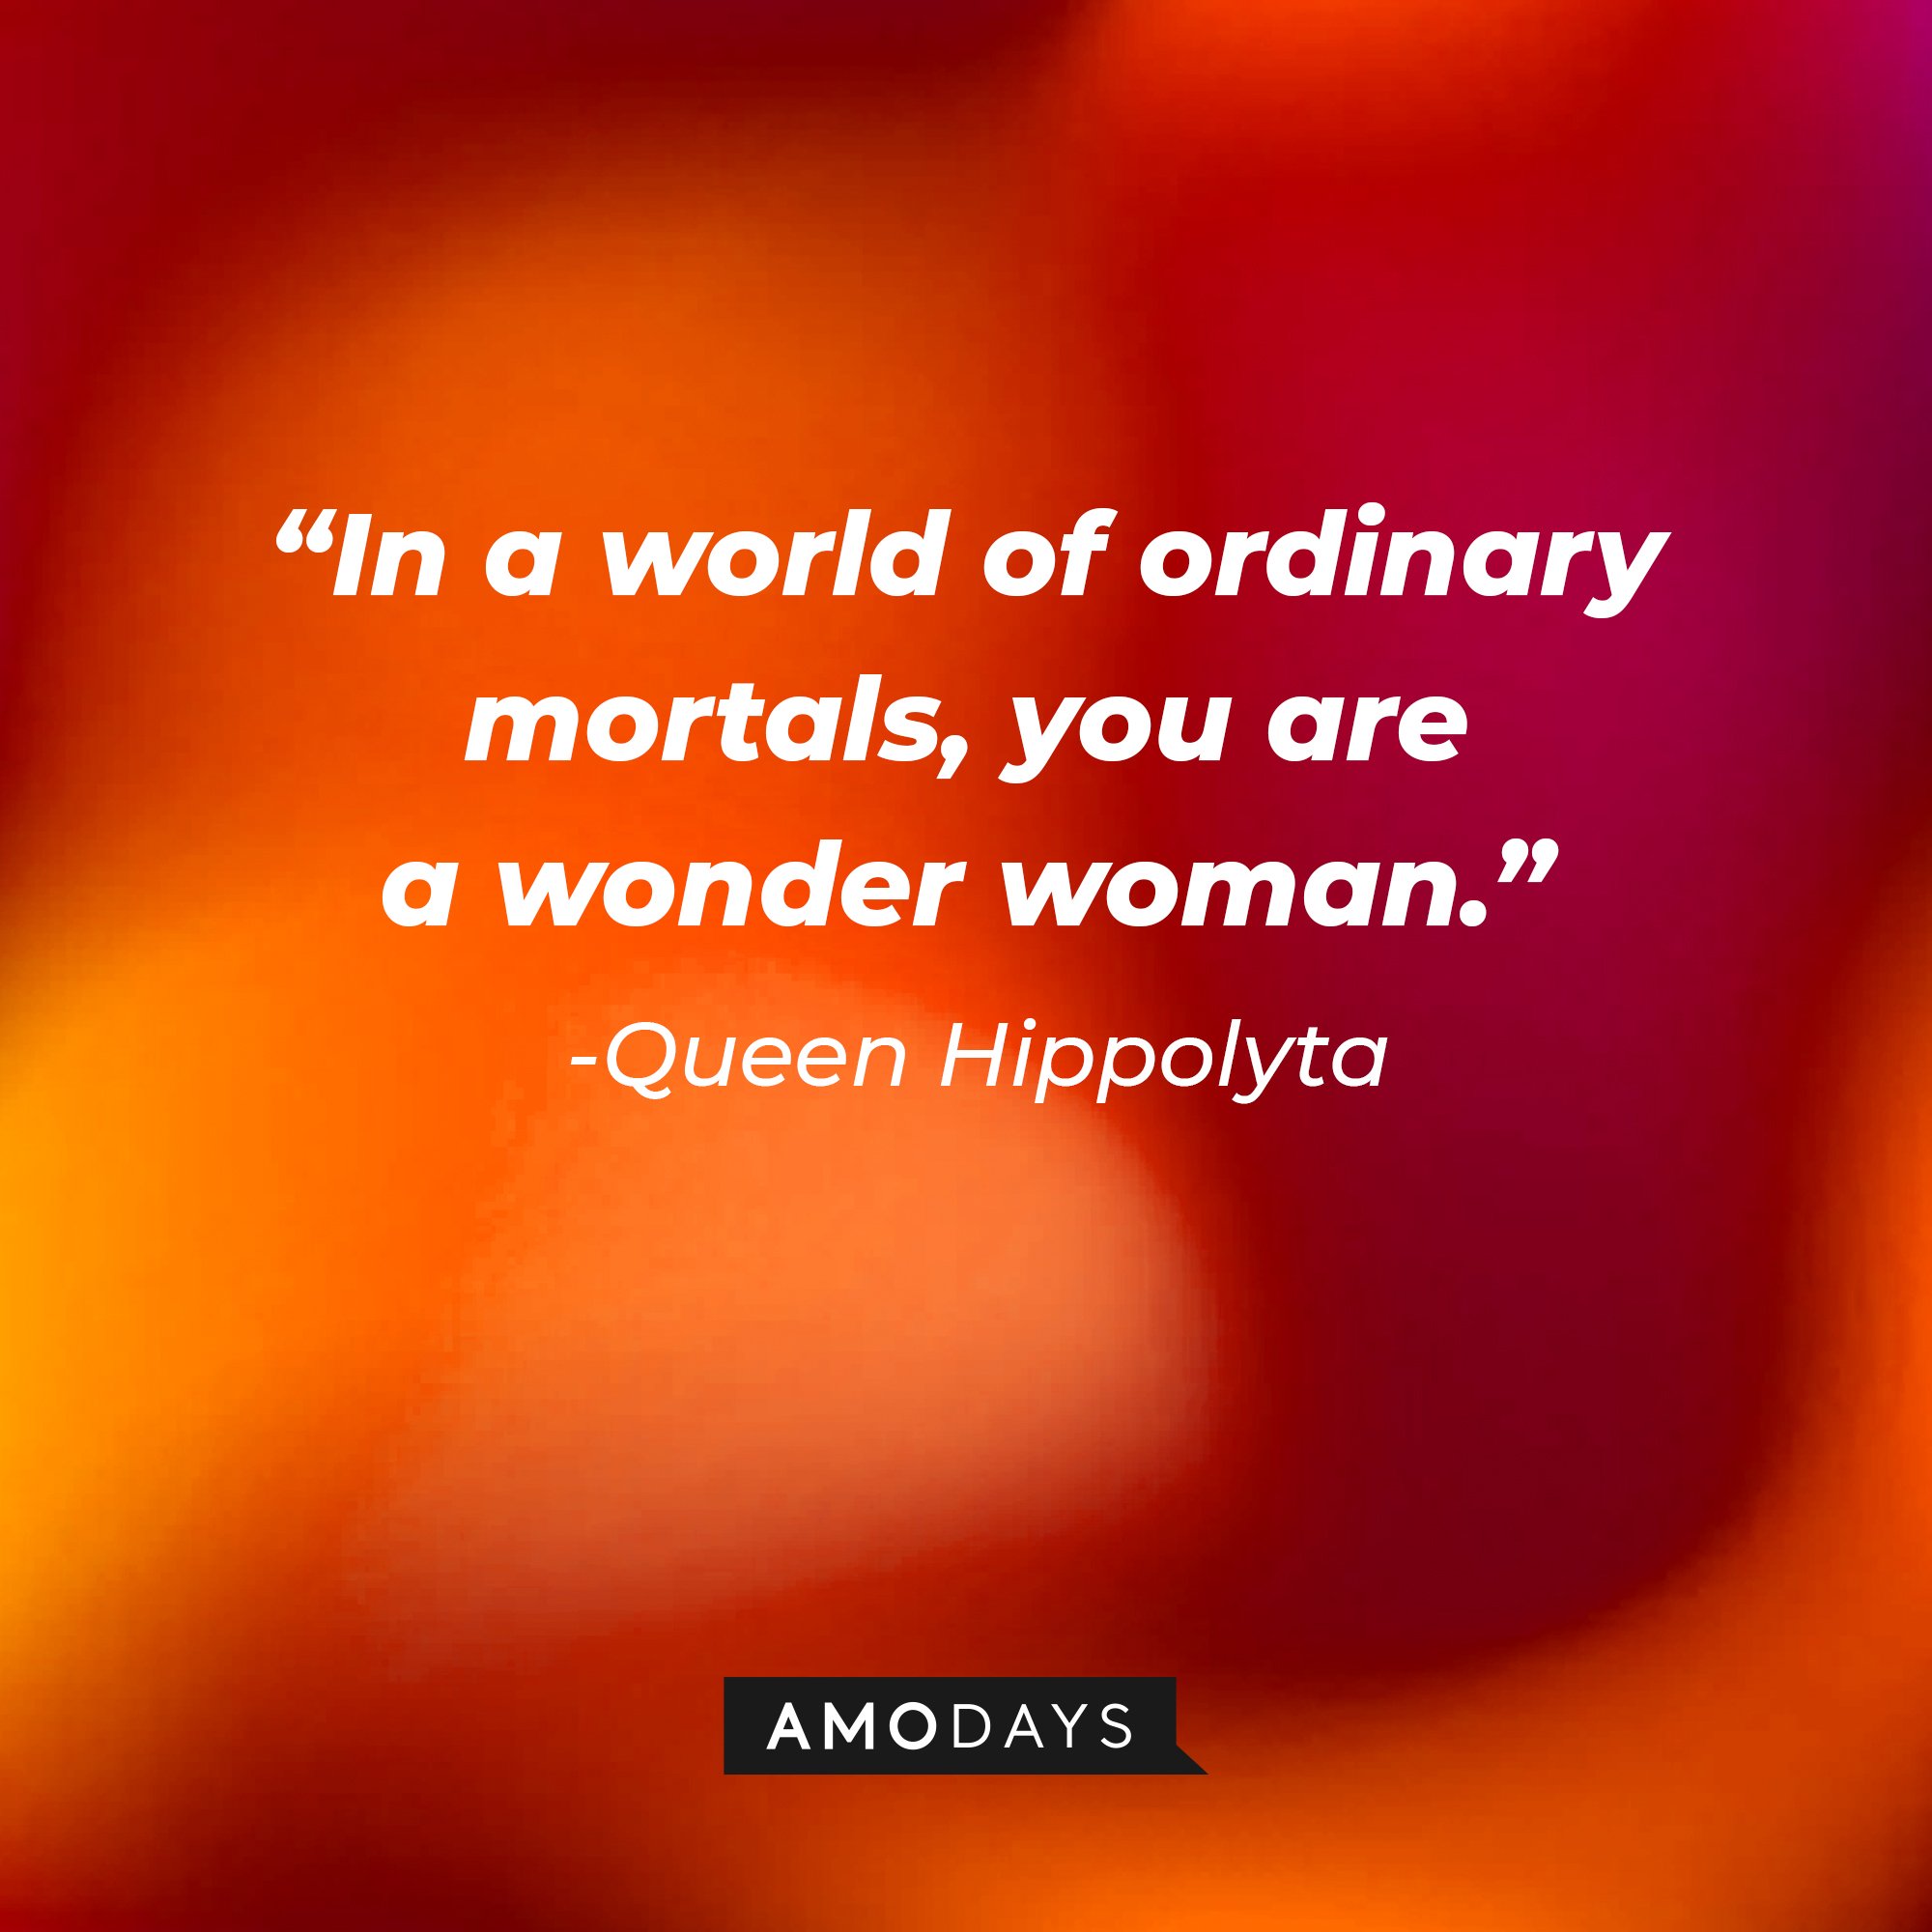 Queen Hippolyta's quote: “In a world of ordinary mortals, you are a wonder woman.” | Image: AmoDays